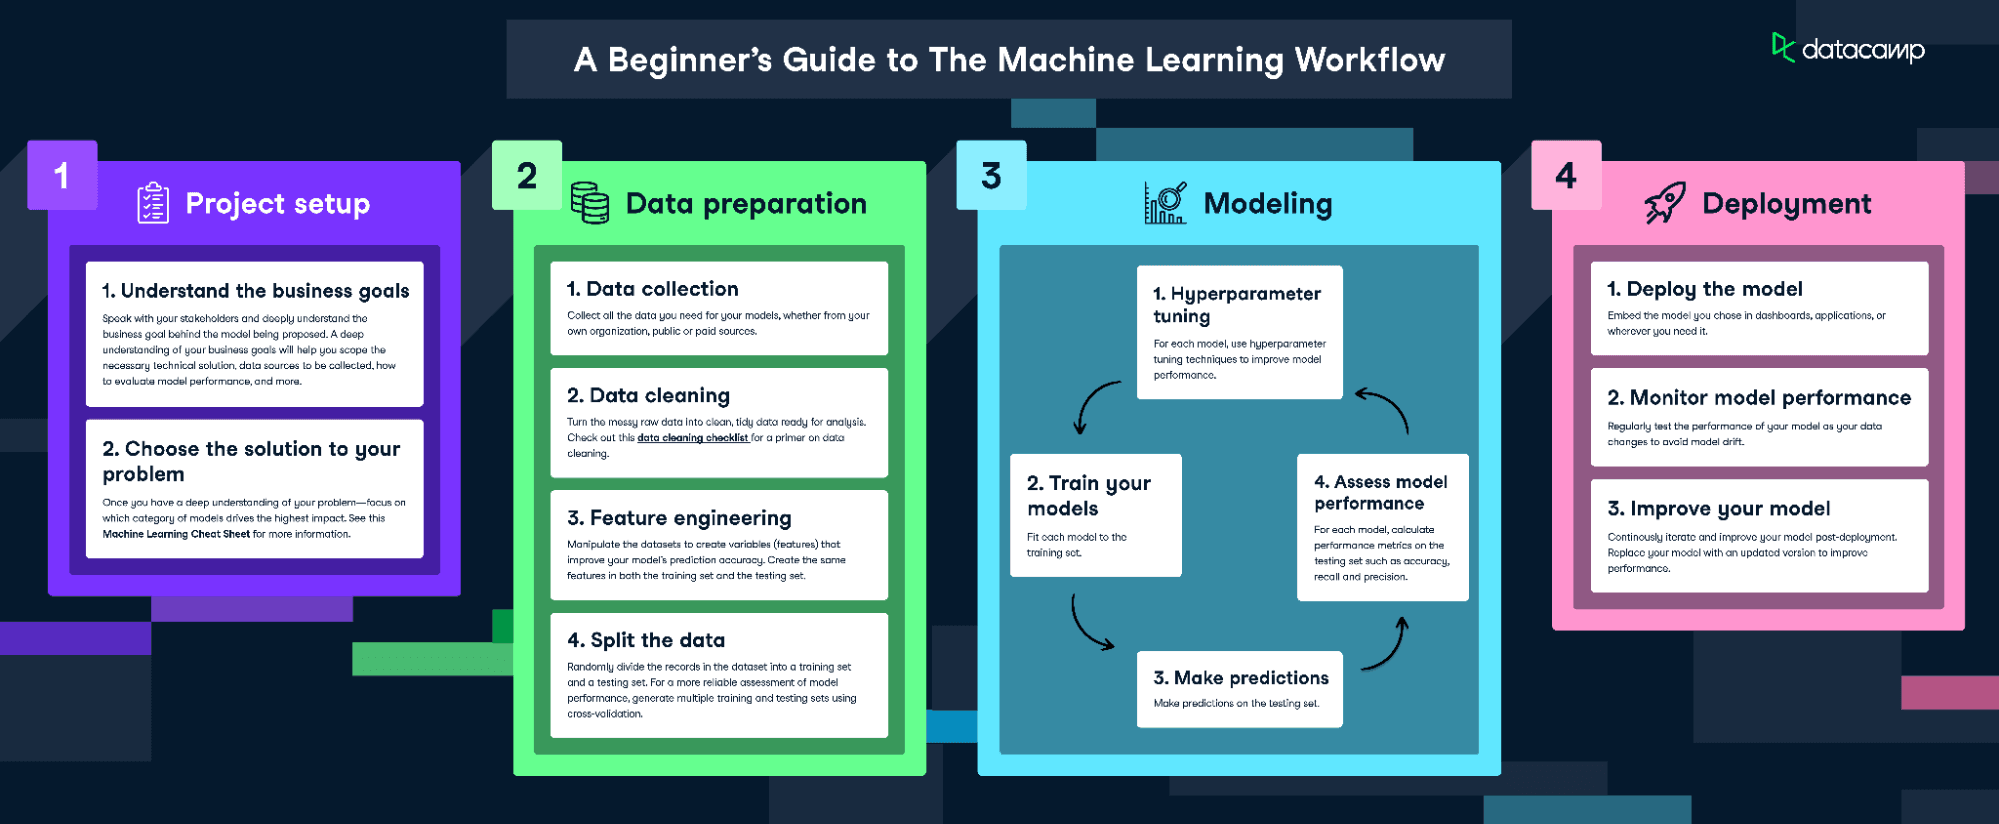 The AI and machine learning workflow